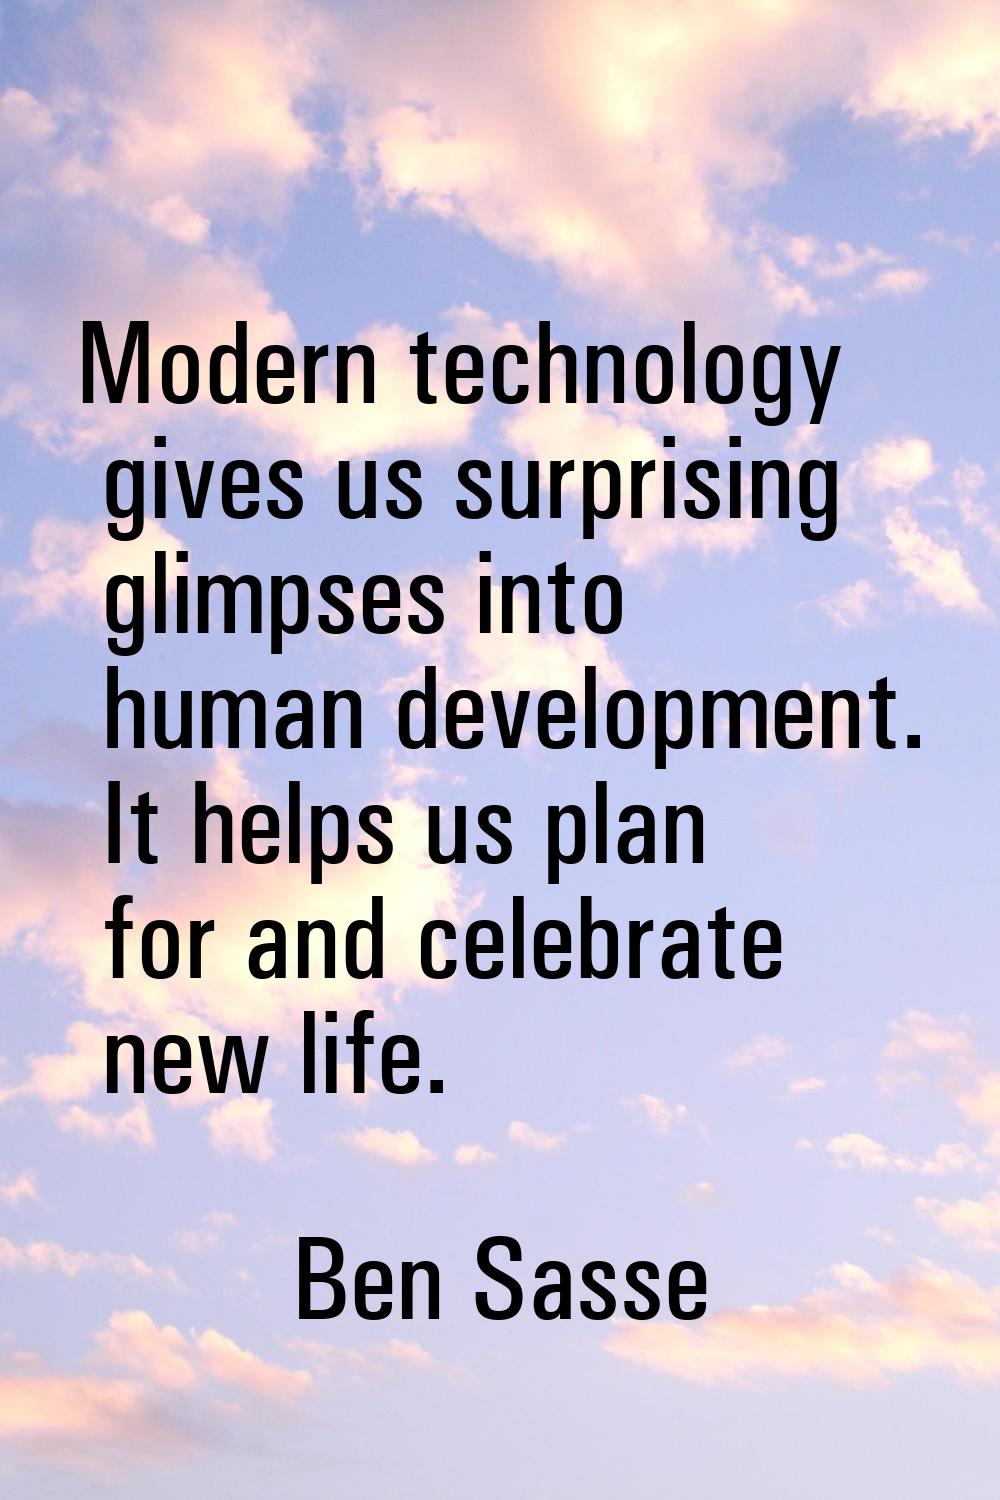 Modern technology gives us surprising glimpses into human development. It helps us plan for and cel